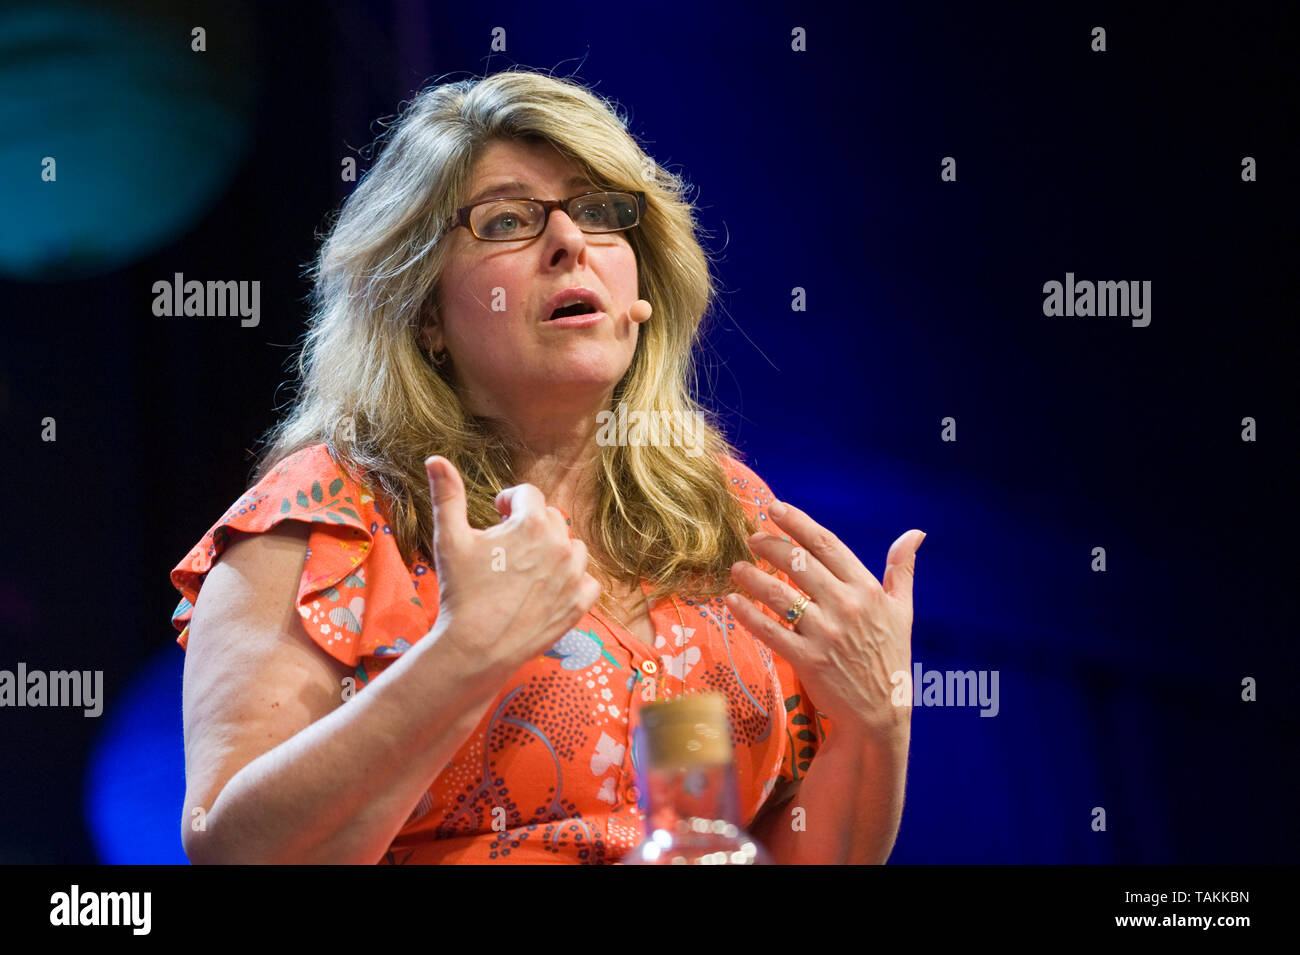 Naomi Wolf American feminist academic author writer and former political advisor speaking on stage at Hay Festival Hay-on-Wye Powys Wales UK Stock Photo